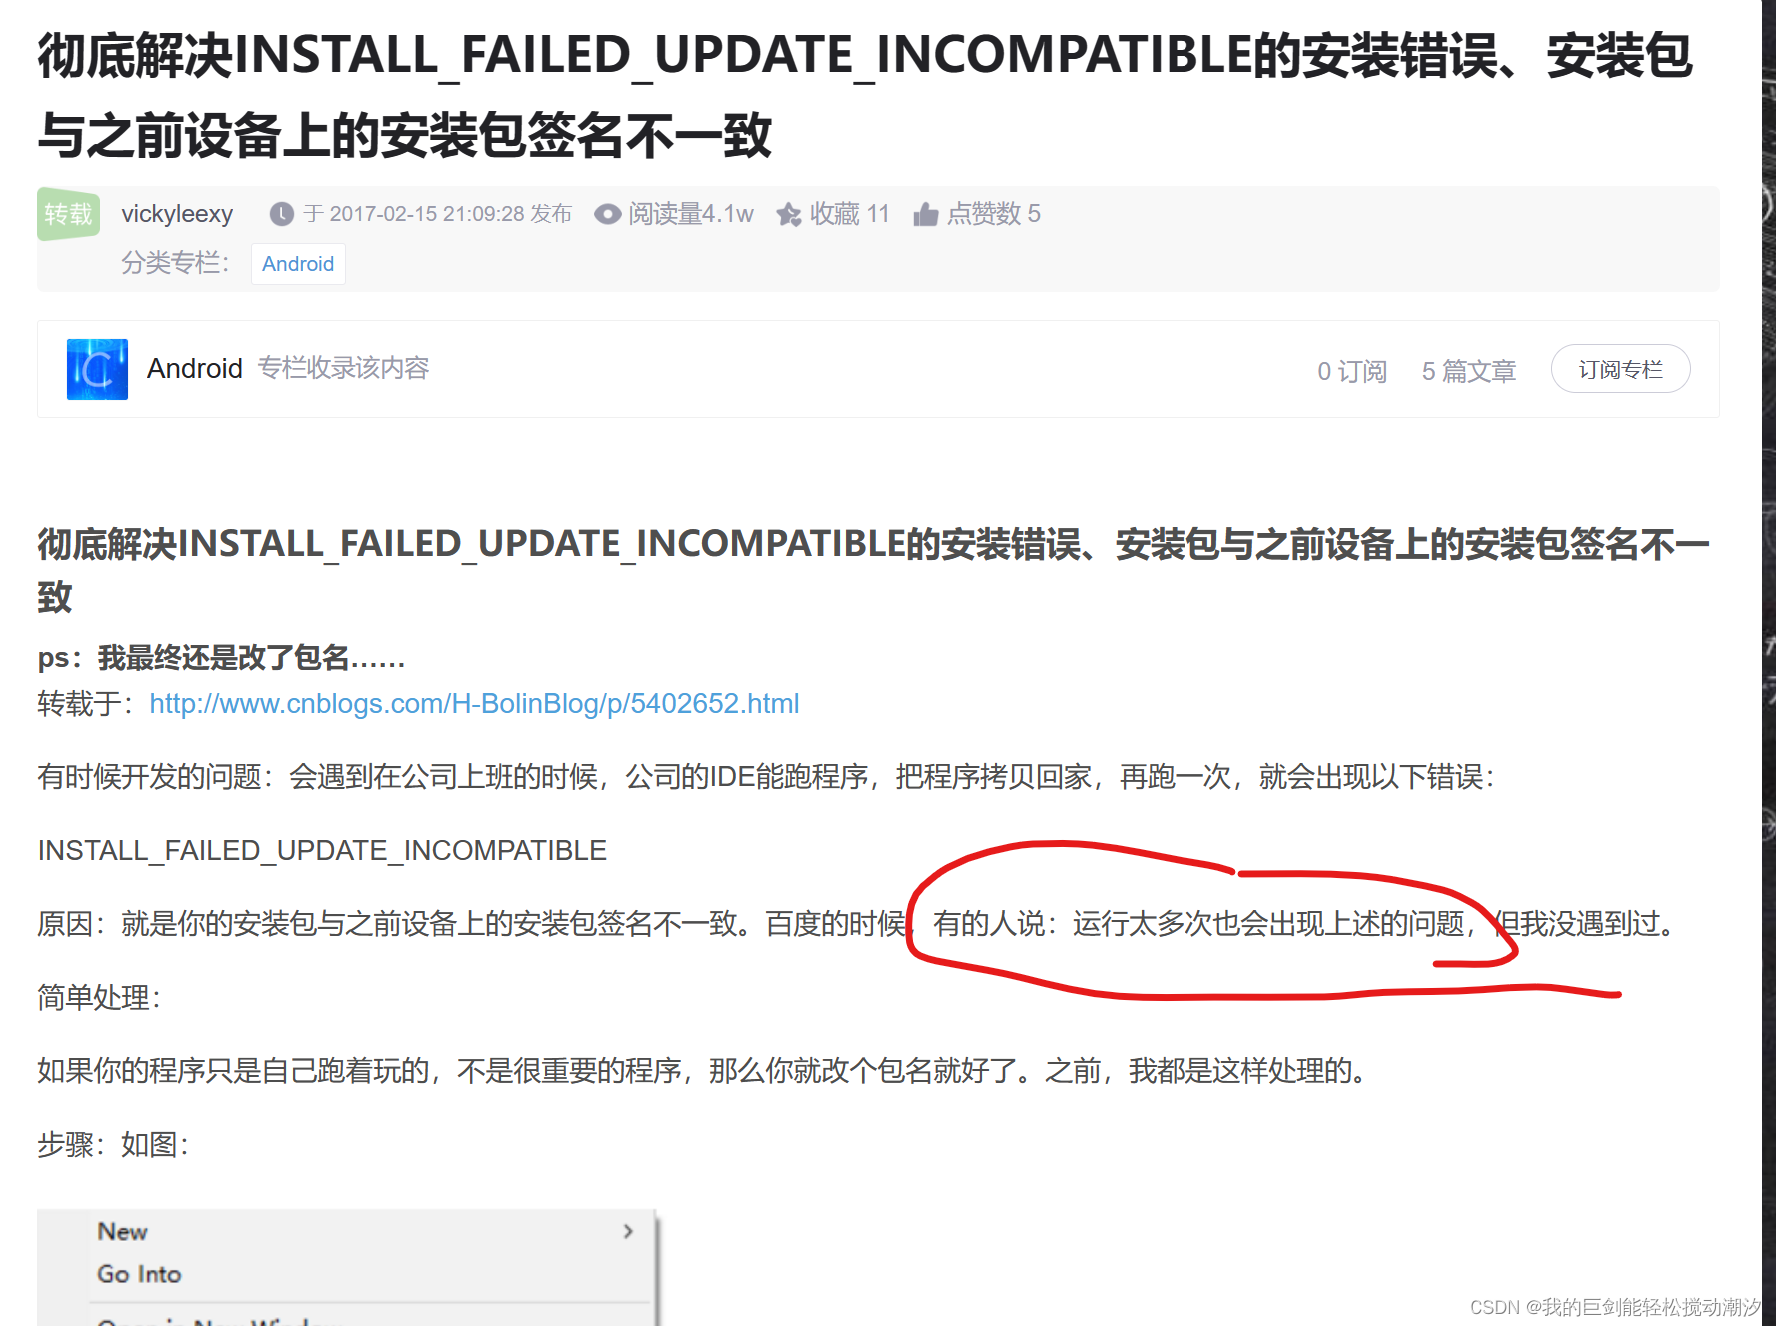 Unity VR Pico apk安装失败：INSTALL_FAILED_UPDATE_INCOMPATIBLE